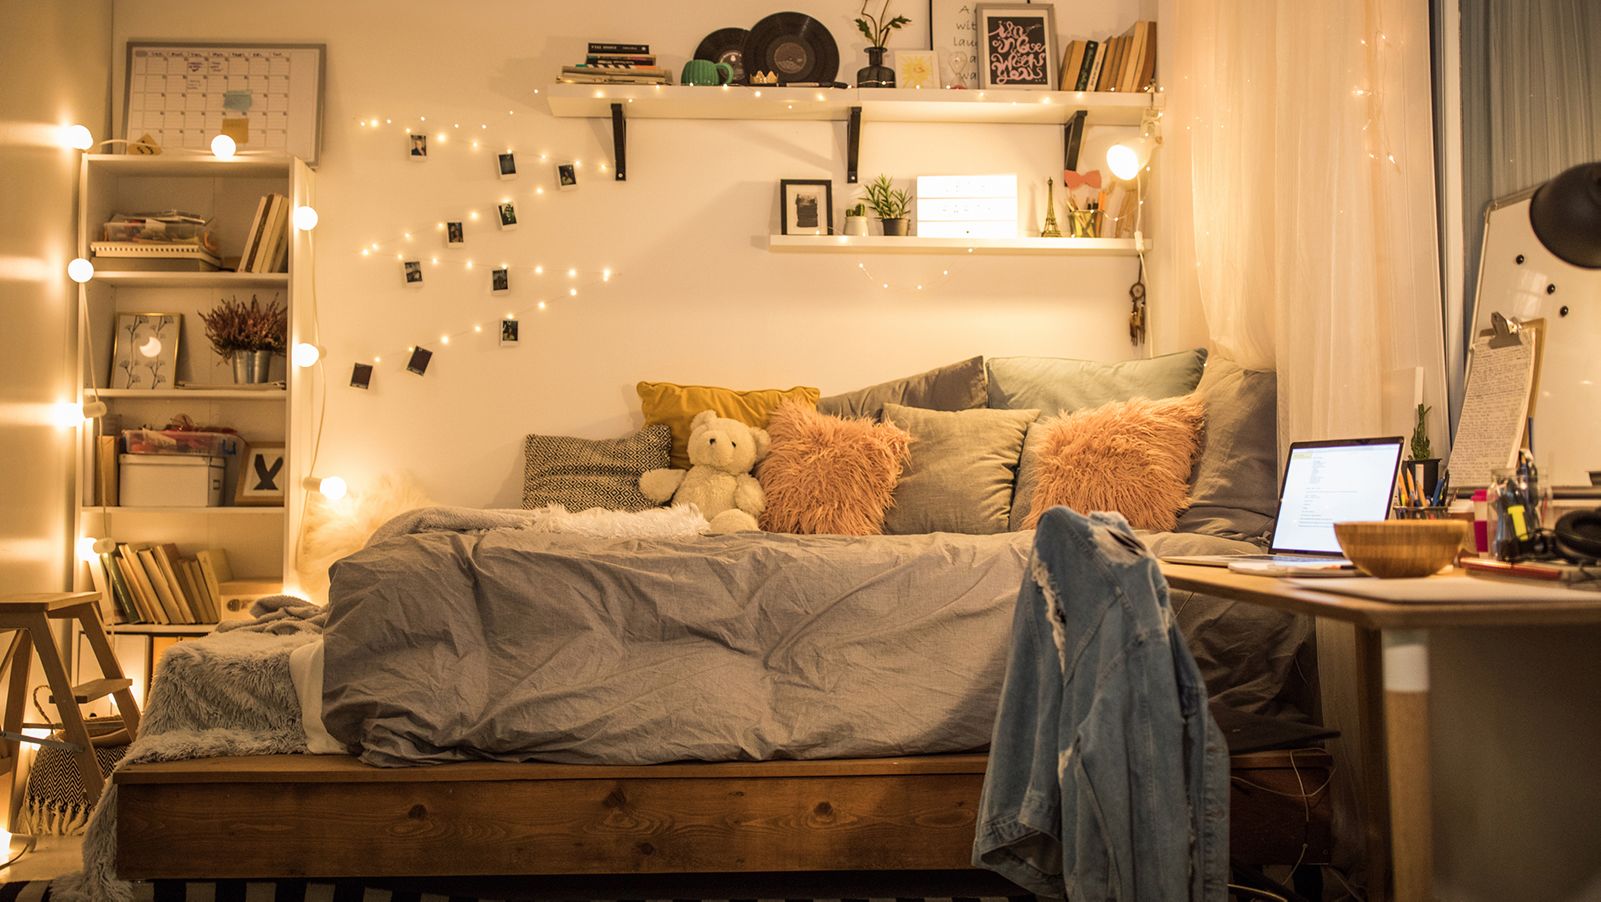 Dorm Room Essentials - Organize and Decorate Everything